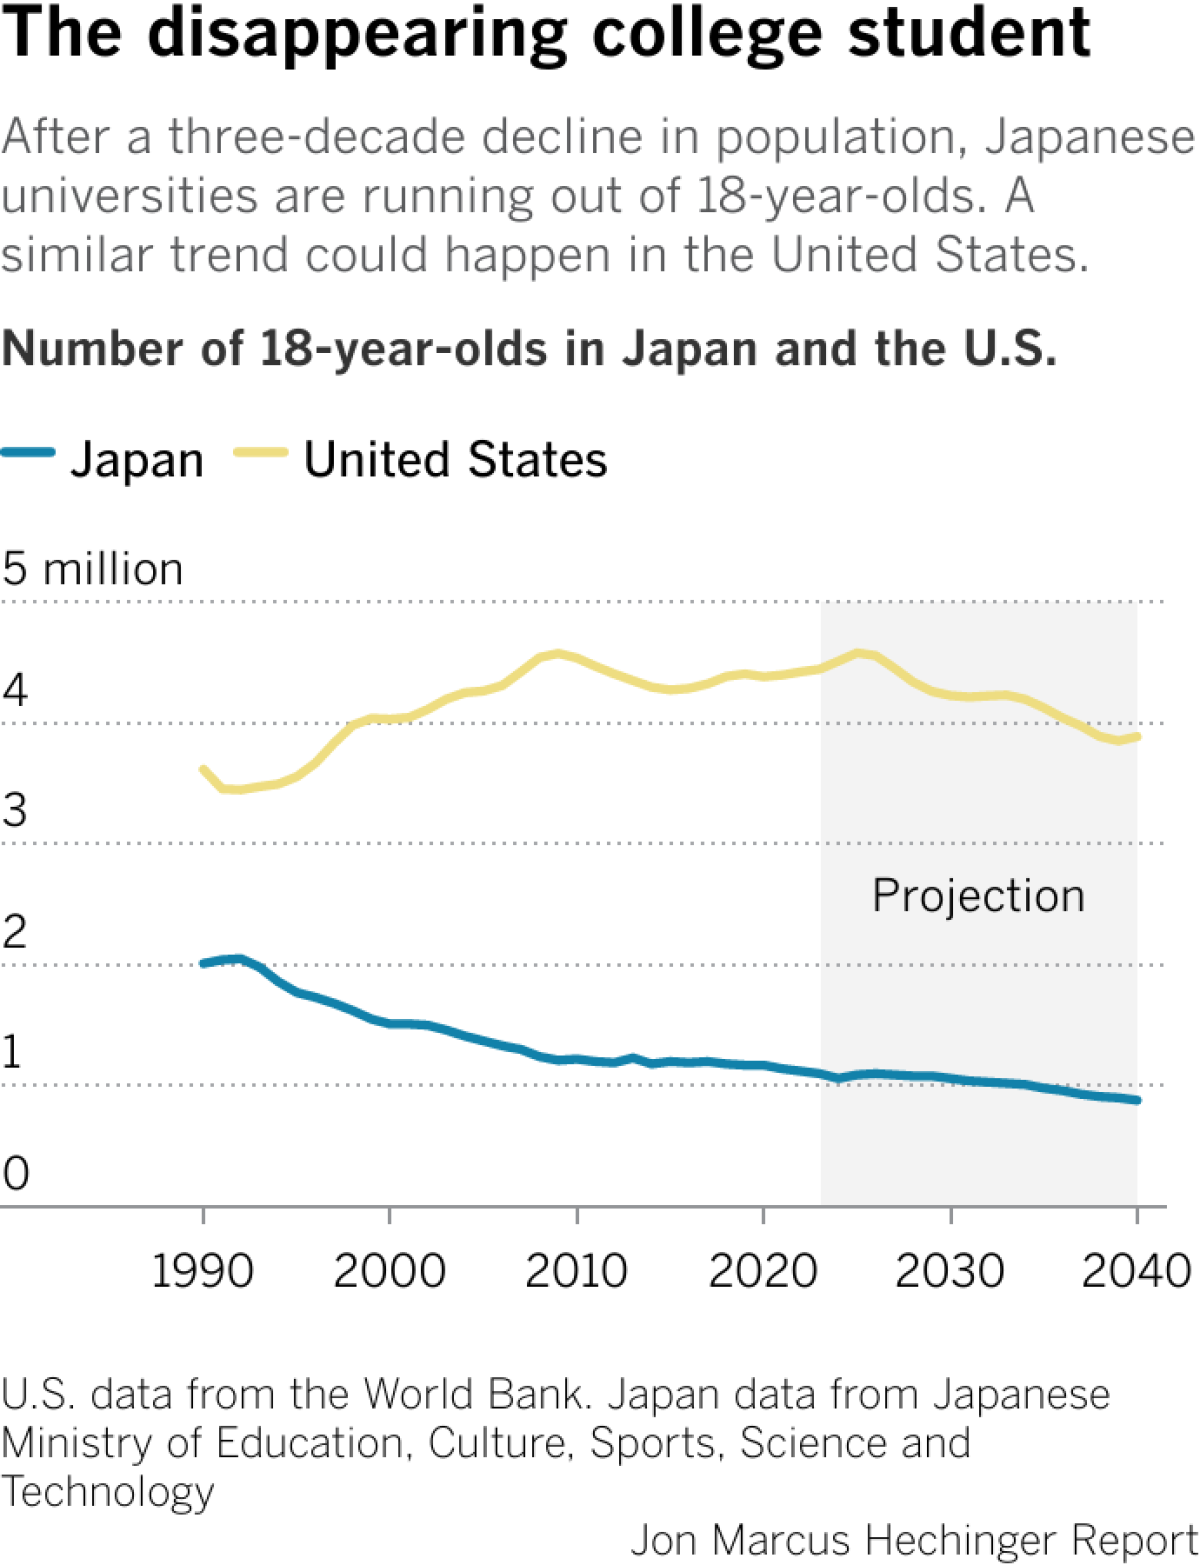 After a three-decade decline in population, Japanese universities are running out of 18-year-olds. A similar trend could happen in the United States.